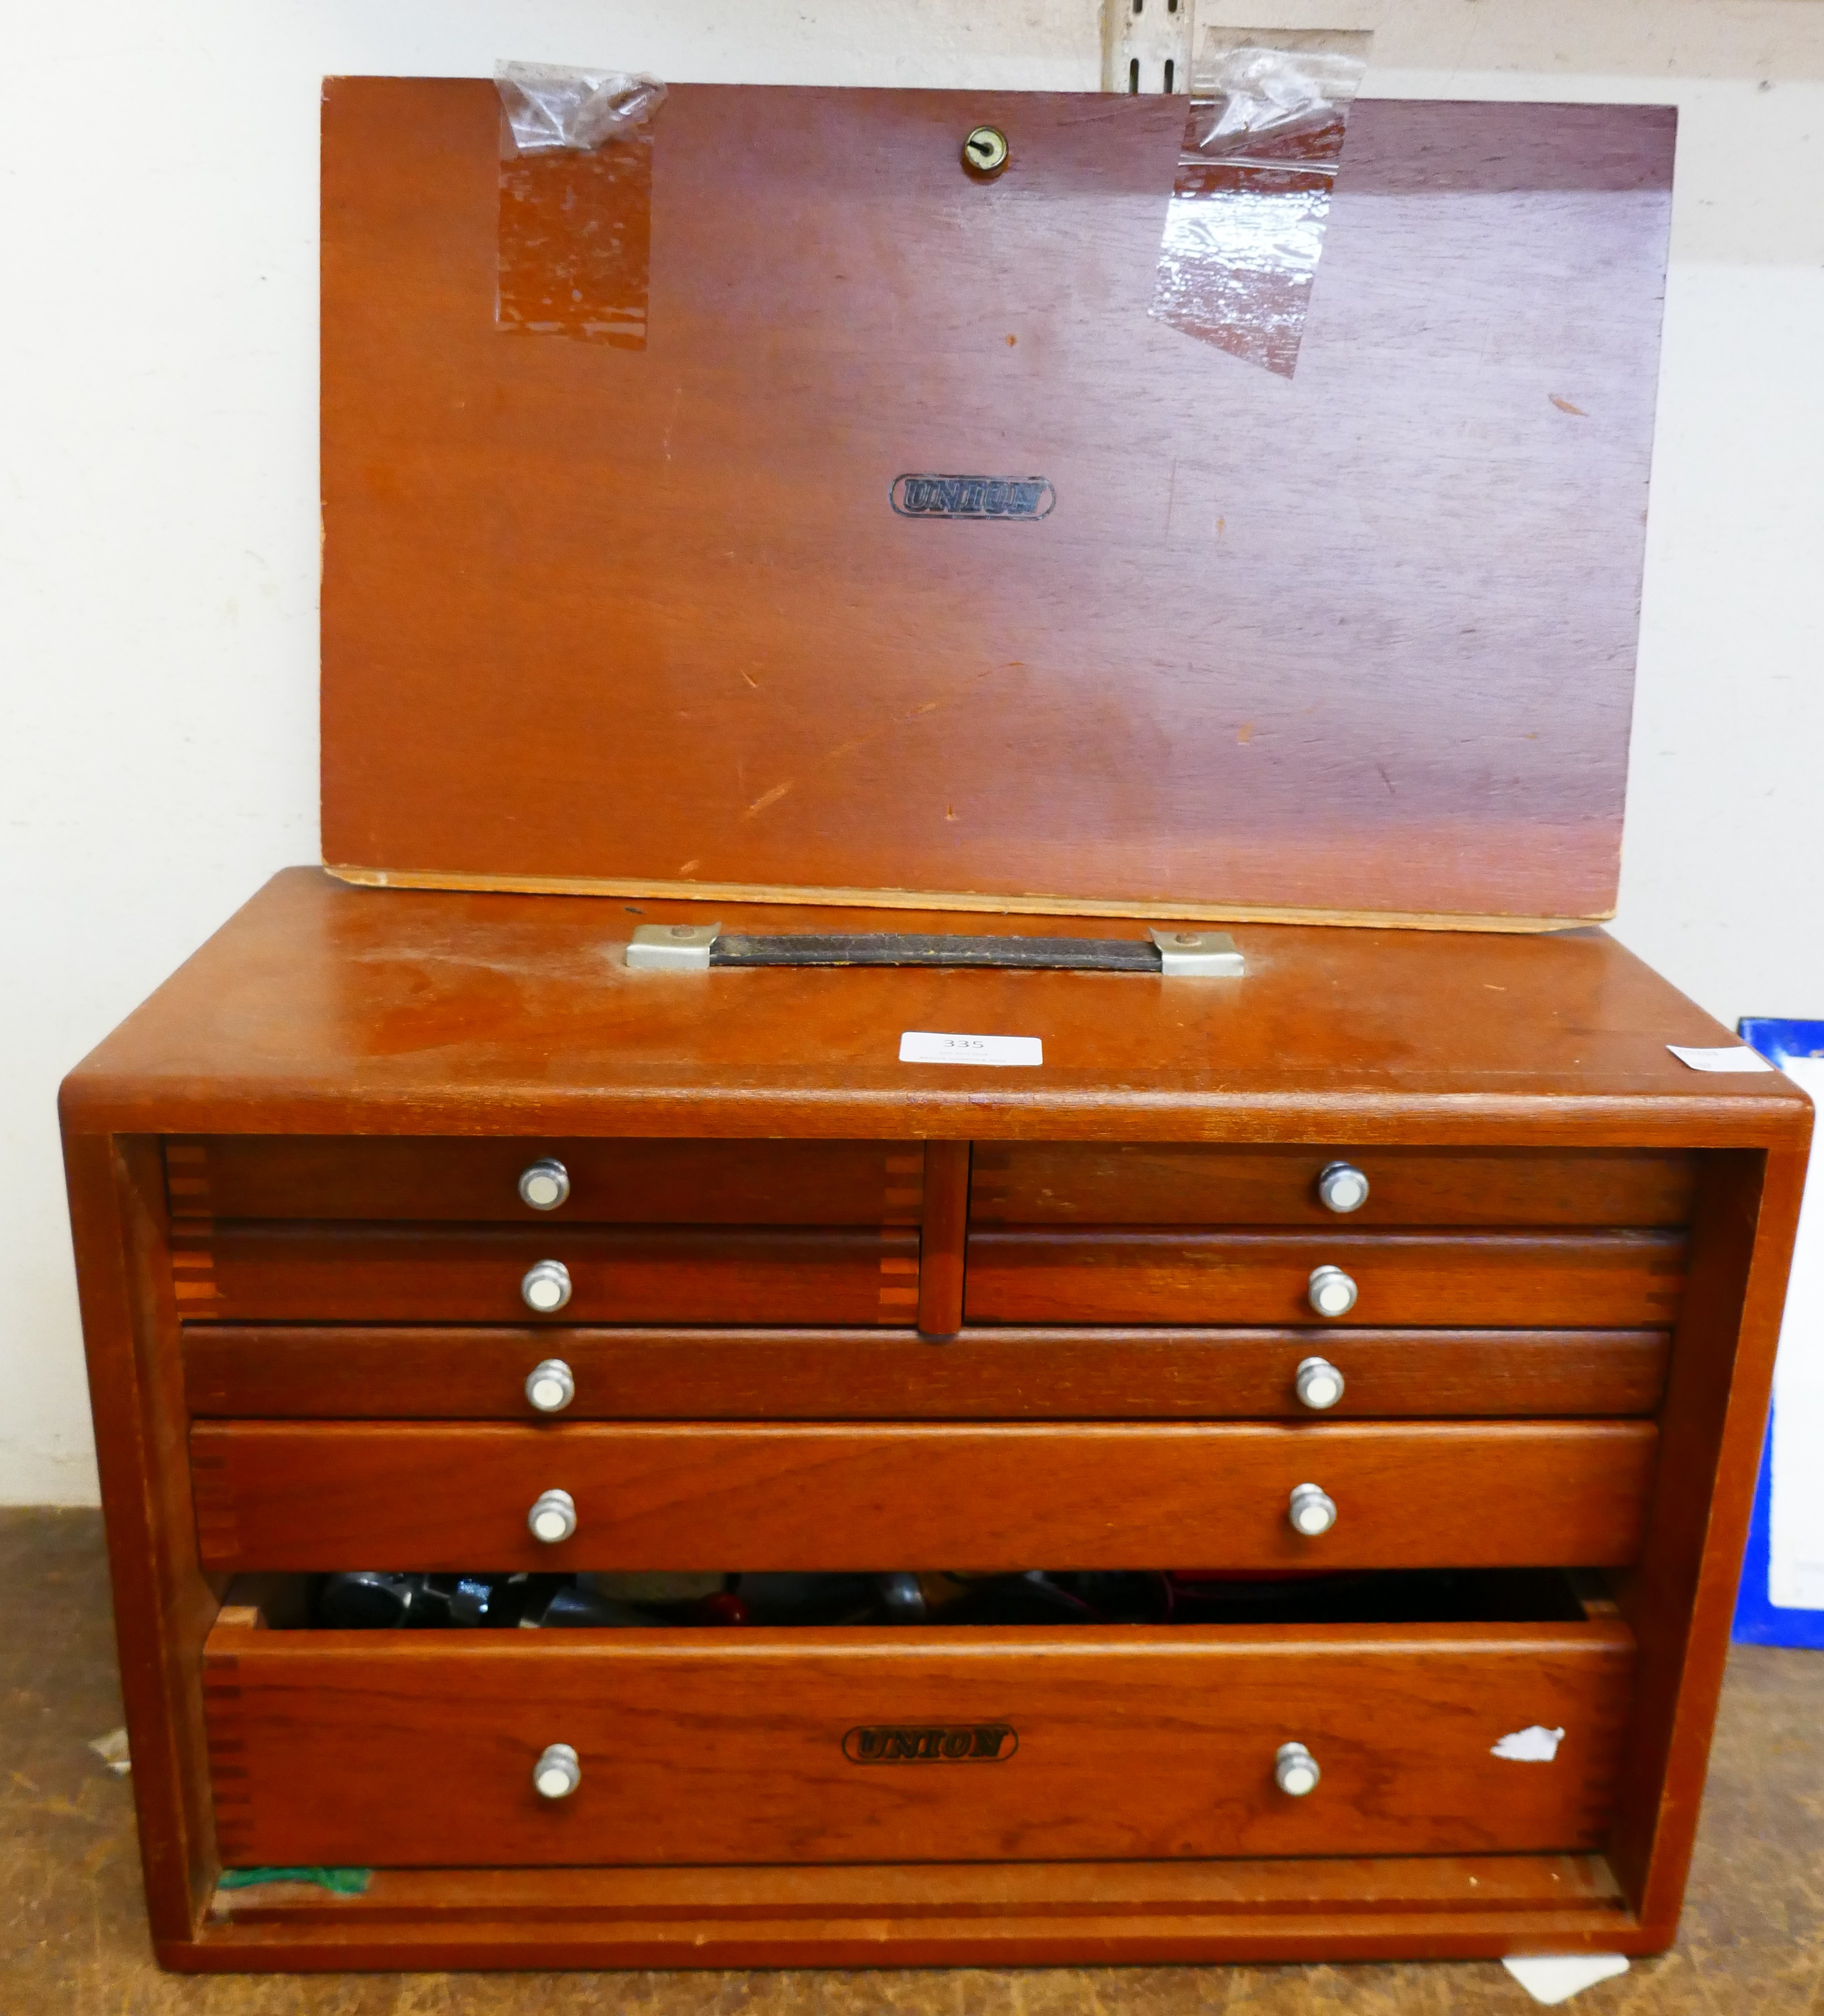 A Union beech engineers tool chest, containing tools